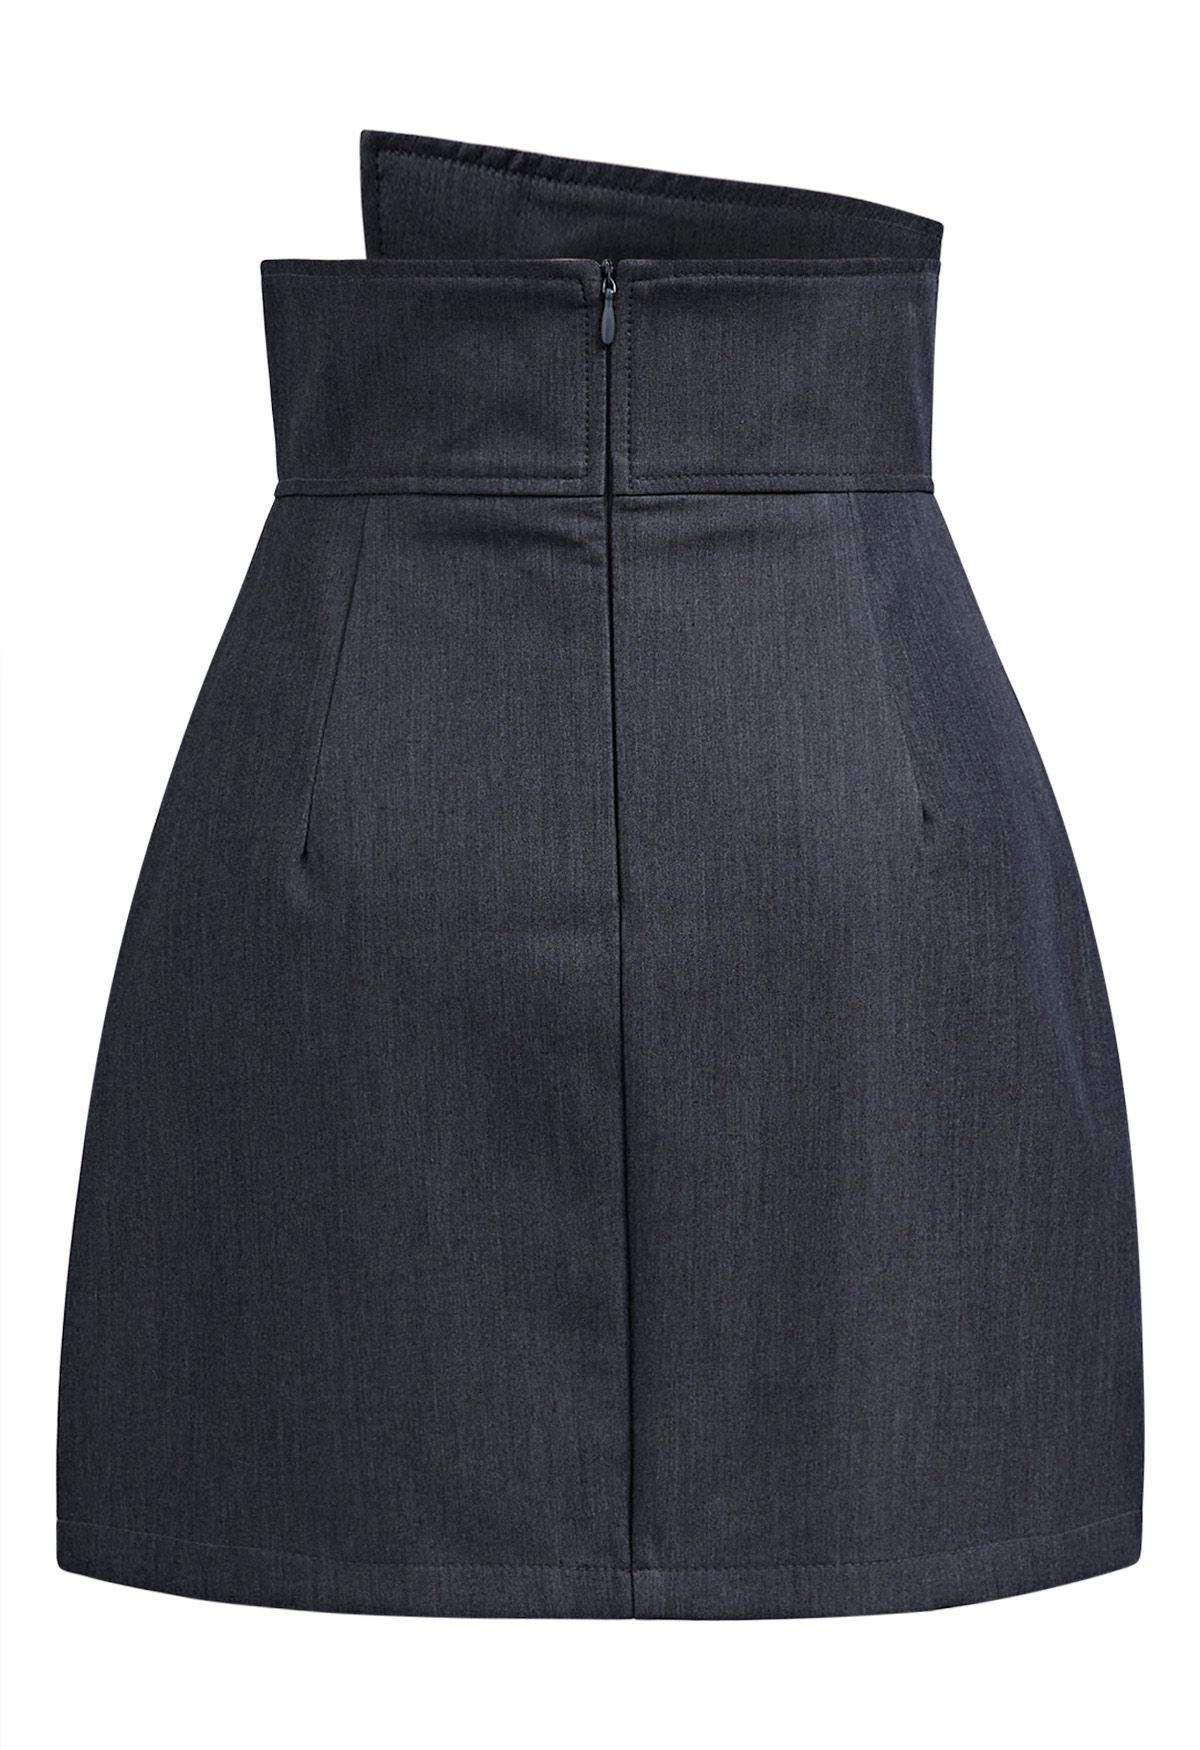 Asymmetric Buttoned Flap Mini Skirt in Smoke - Retro, Indie and Unique ...